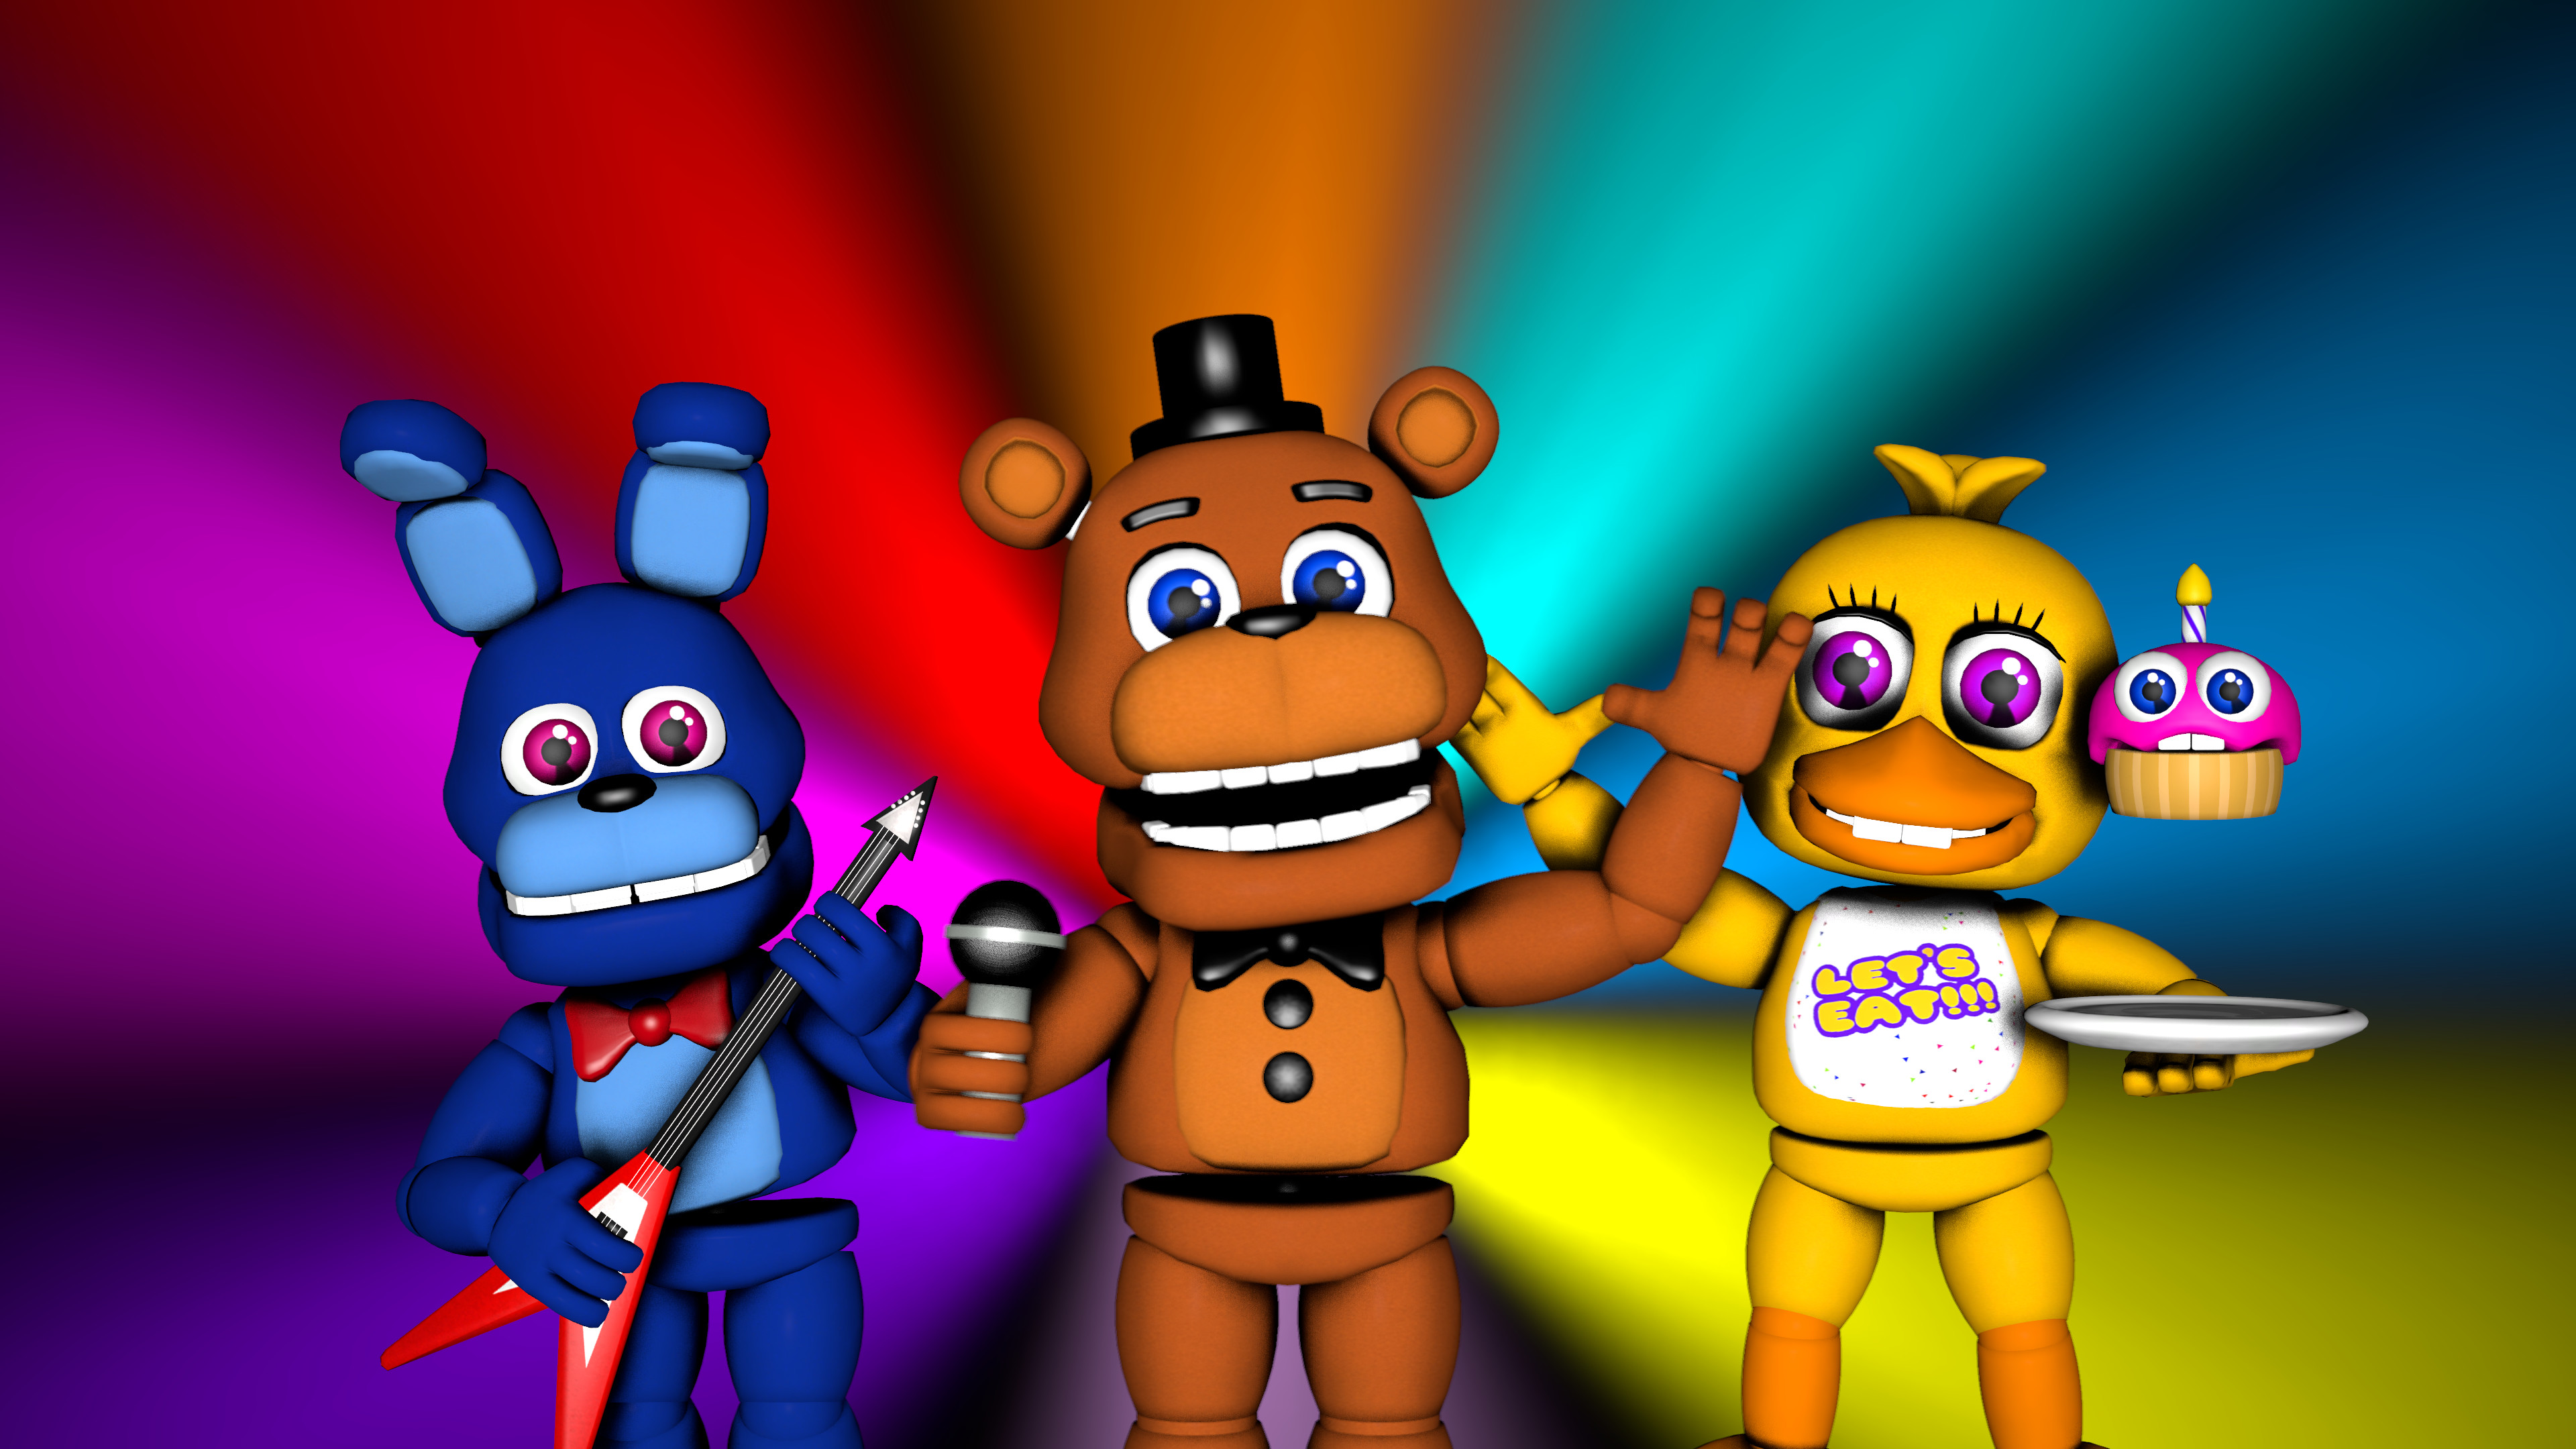 3840x2160 Welcome To FNAF World by Th3Unkn0wns Welcome To FNAF World by Th3Unkn0wns